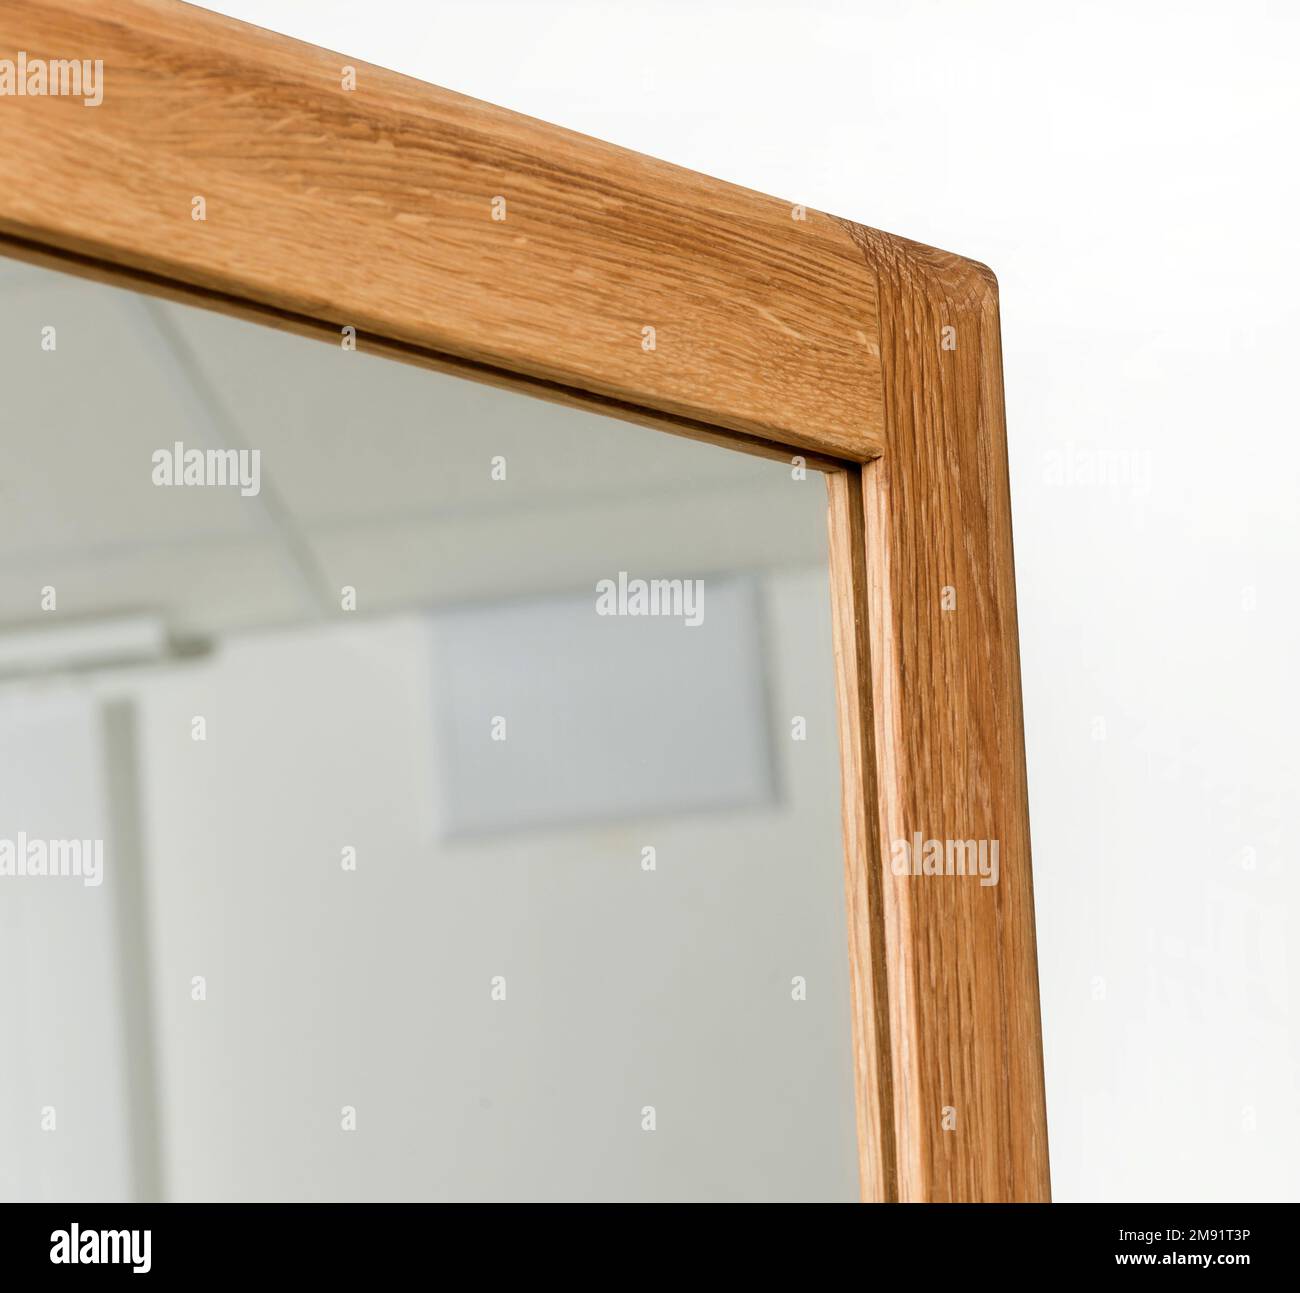 Wooden mirror frame corner isolated over white background, wooden eco furniture elements. Solid wood furniture leg Stock Photo